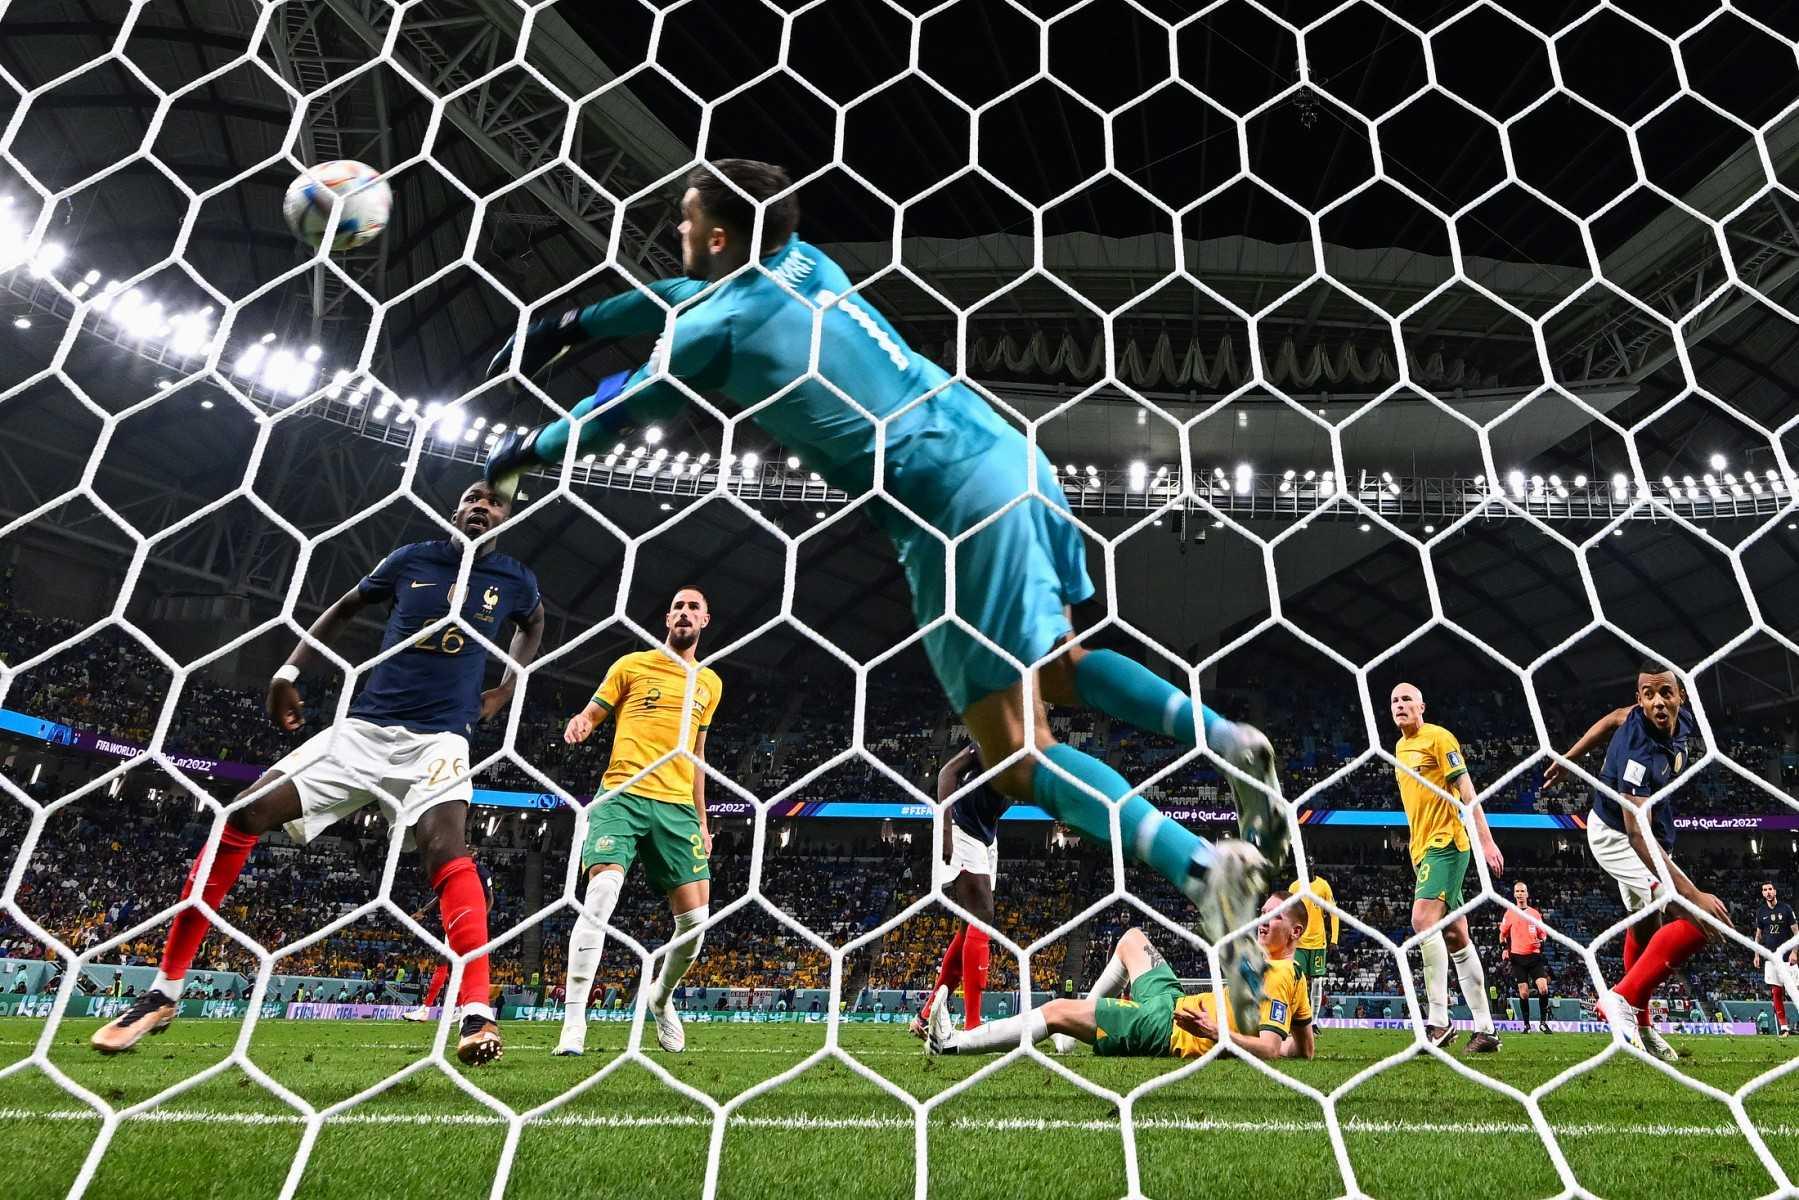 France's forward Marcus Thuram (left) reacts as Australia's goalkeeper Mathew Ryan (centre) makes a save during the Qatar 2022 World Cup Group D football match between France and Australia at the Al-Janoub Stadium in Al-Wakrah, south of Doha, Nov 22. Photo: AFP